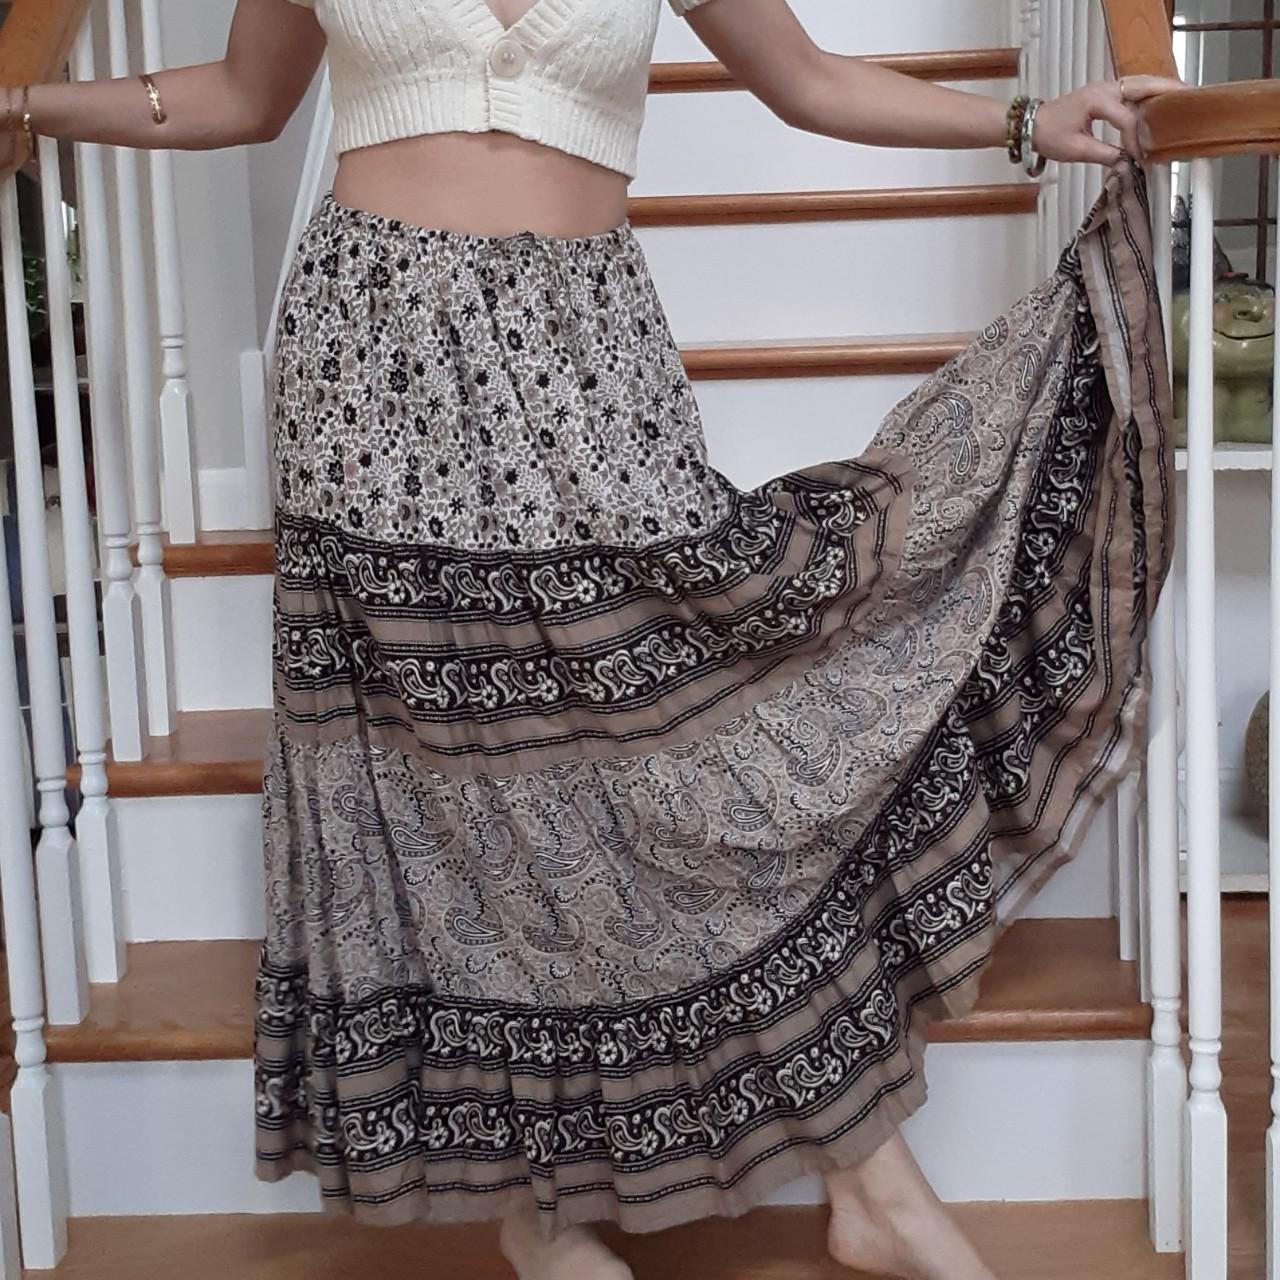 Product Image 2 - Boho brown Maxi skirt
The hippy